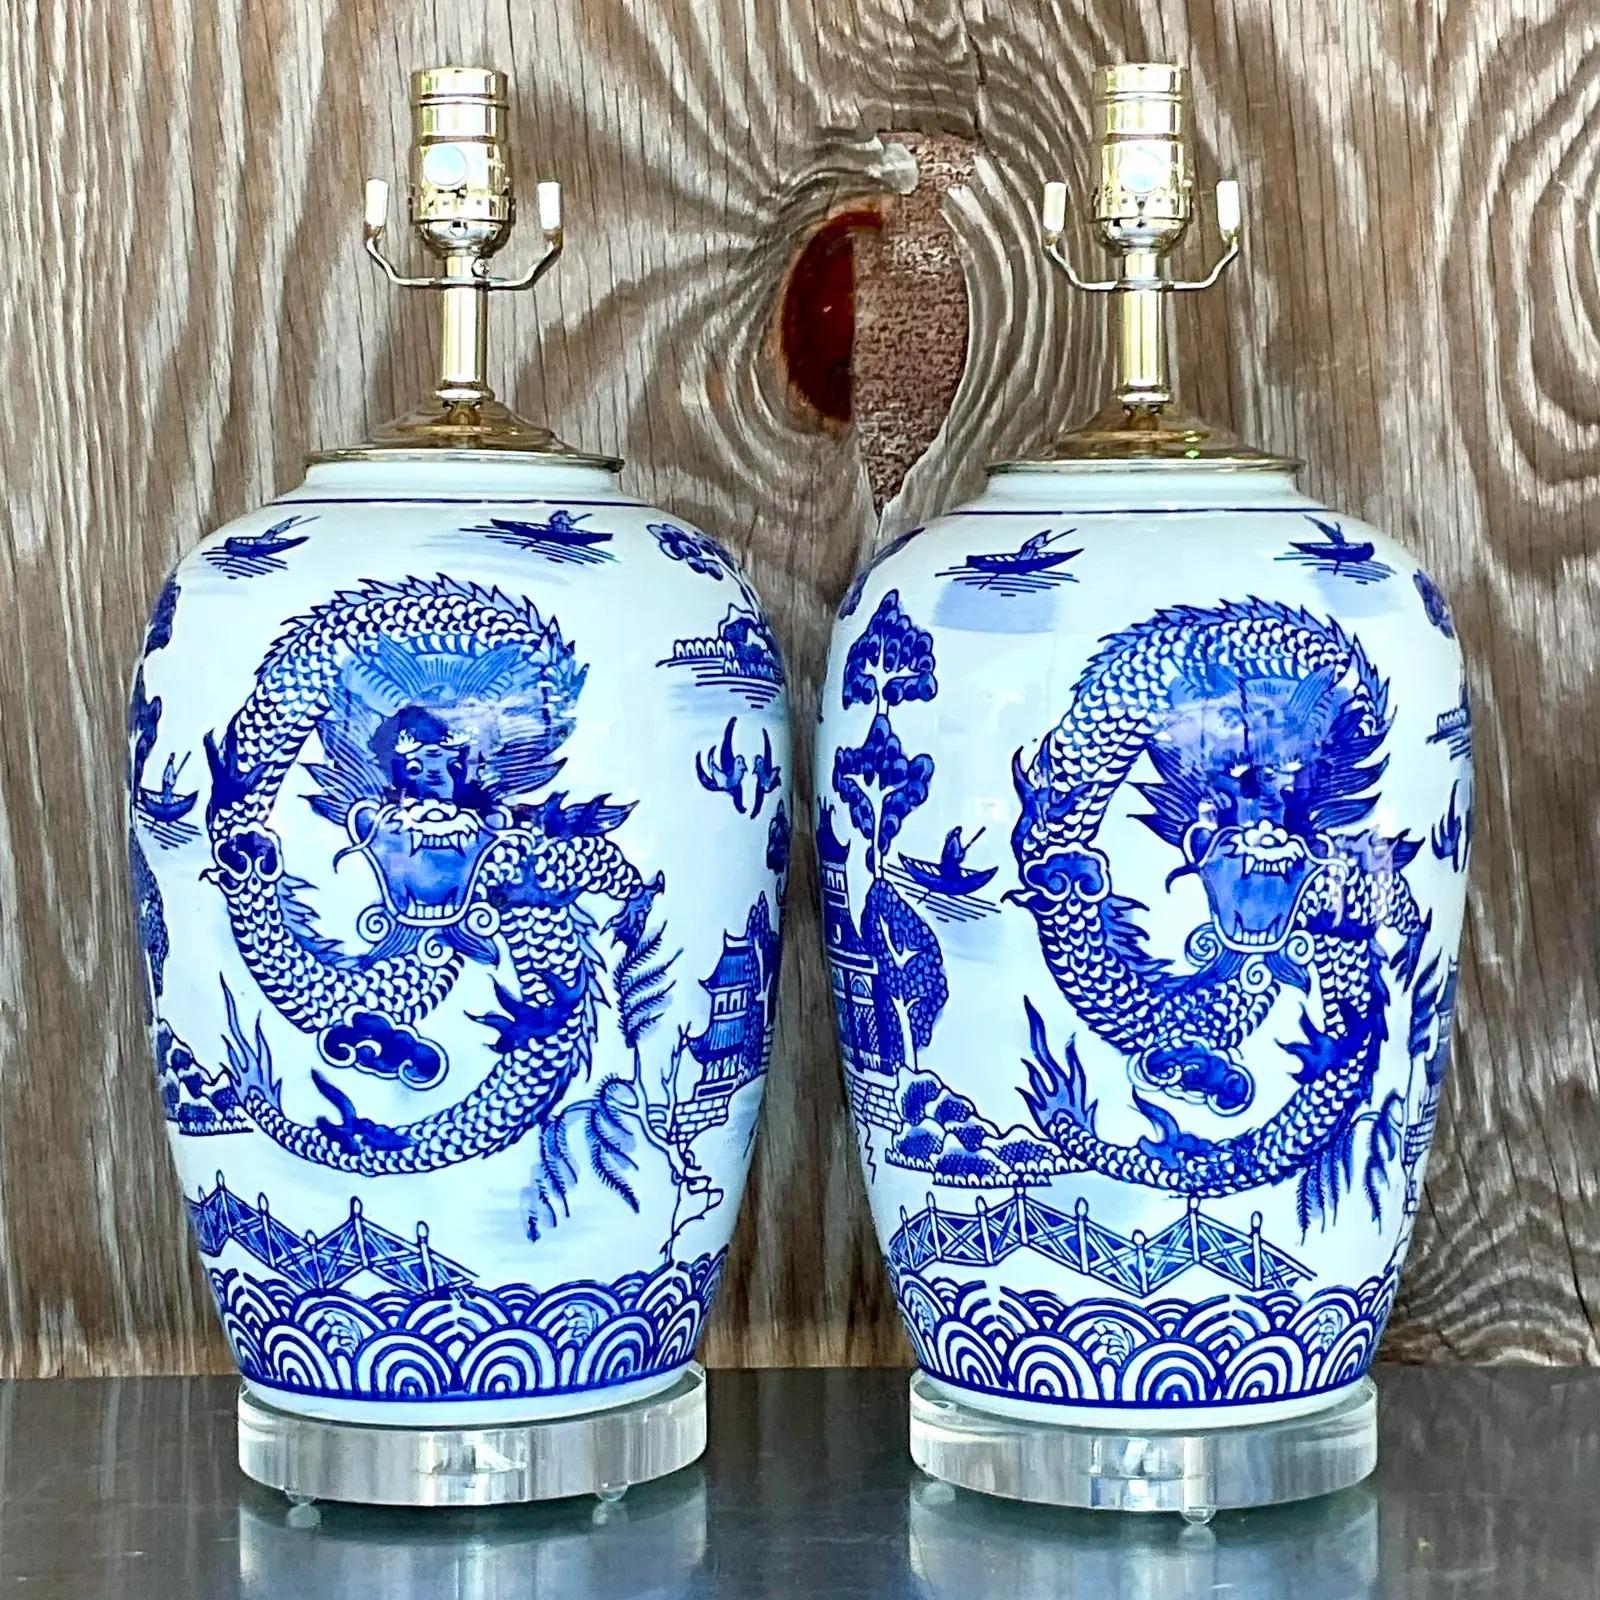 Fantastic vintage Asian table lamps. Beautiful blue and white design with a chic dragon circling the lamps. Fully restored with all new hardware and wiring. Acquired from a Palm Beach estate.